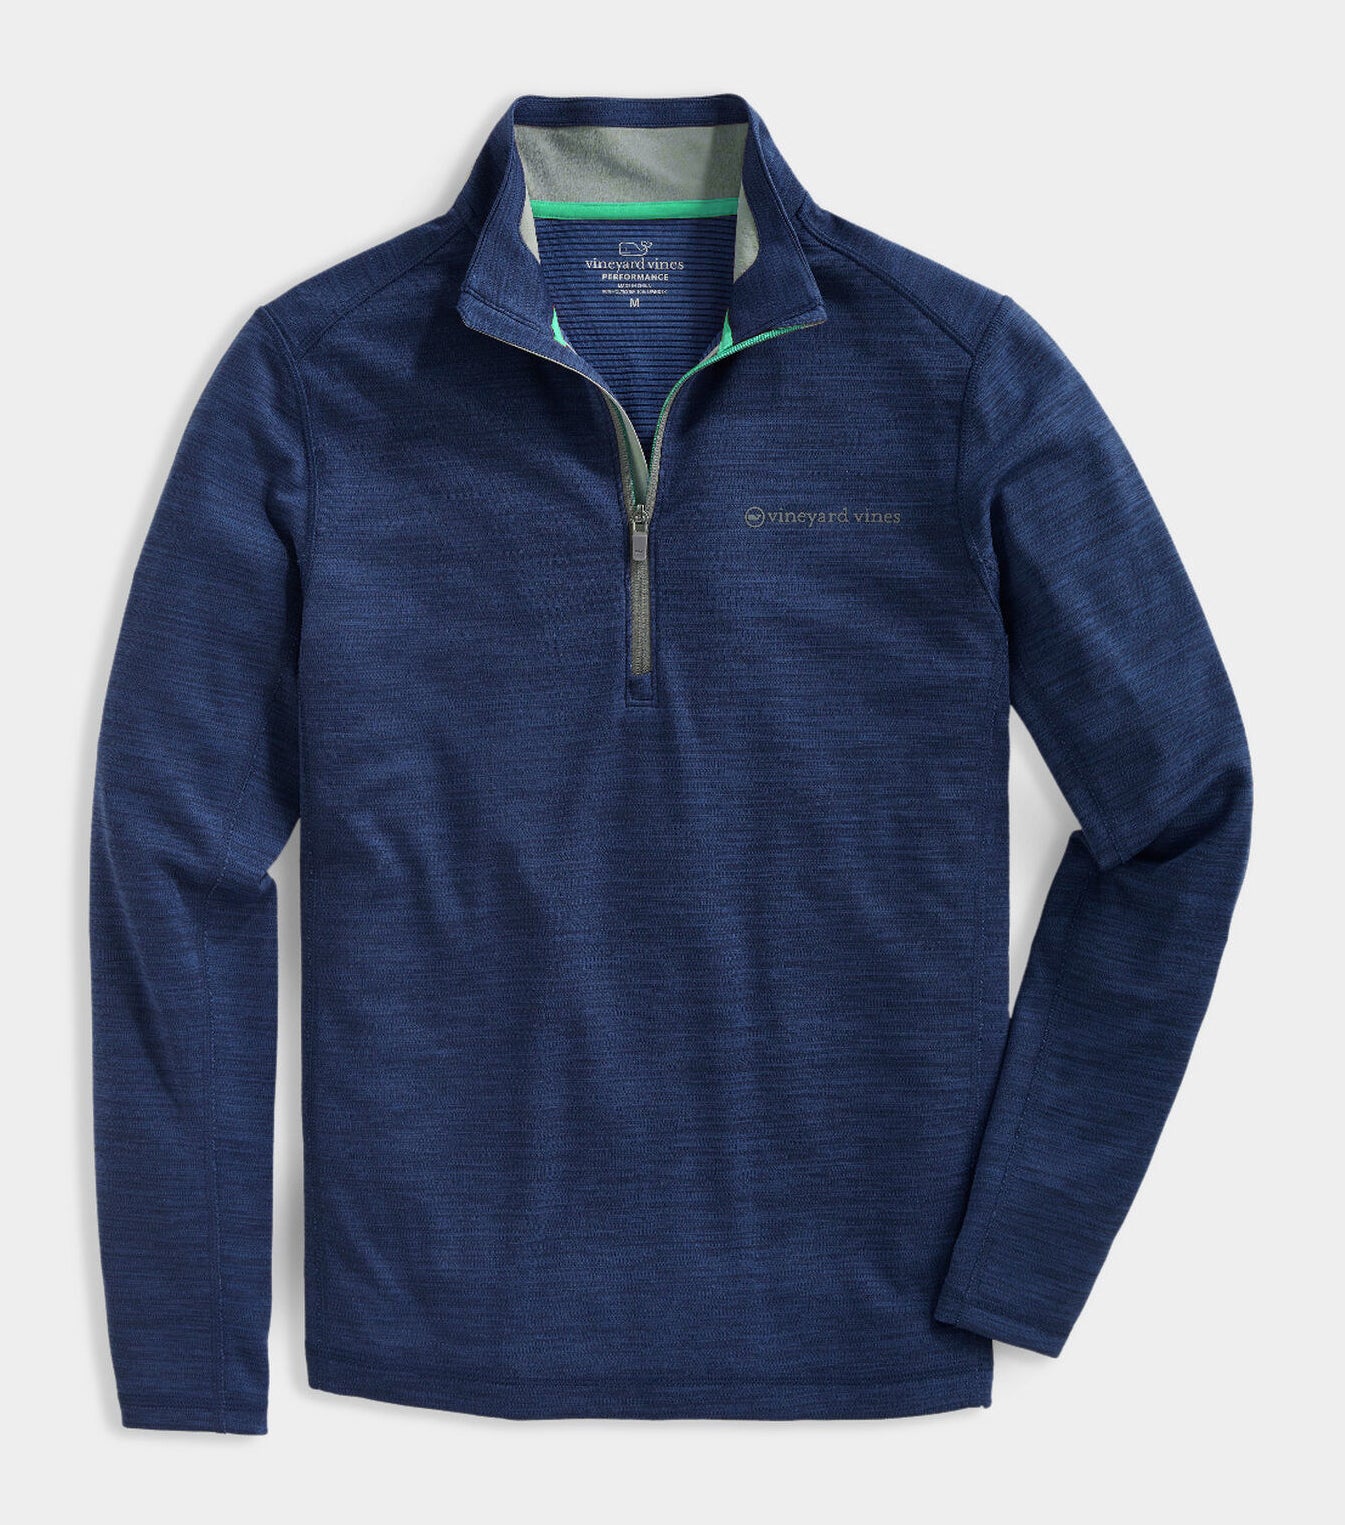 A solid-colored quarter-zip pullover